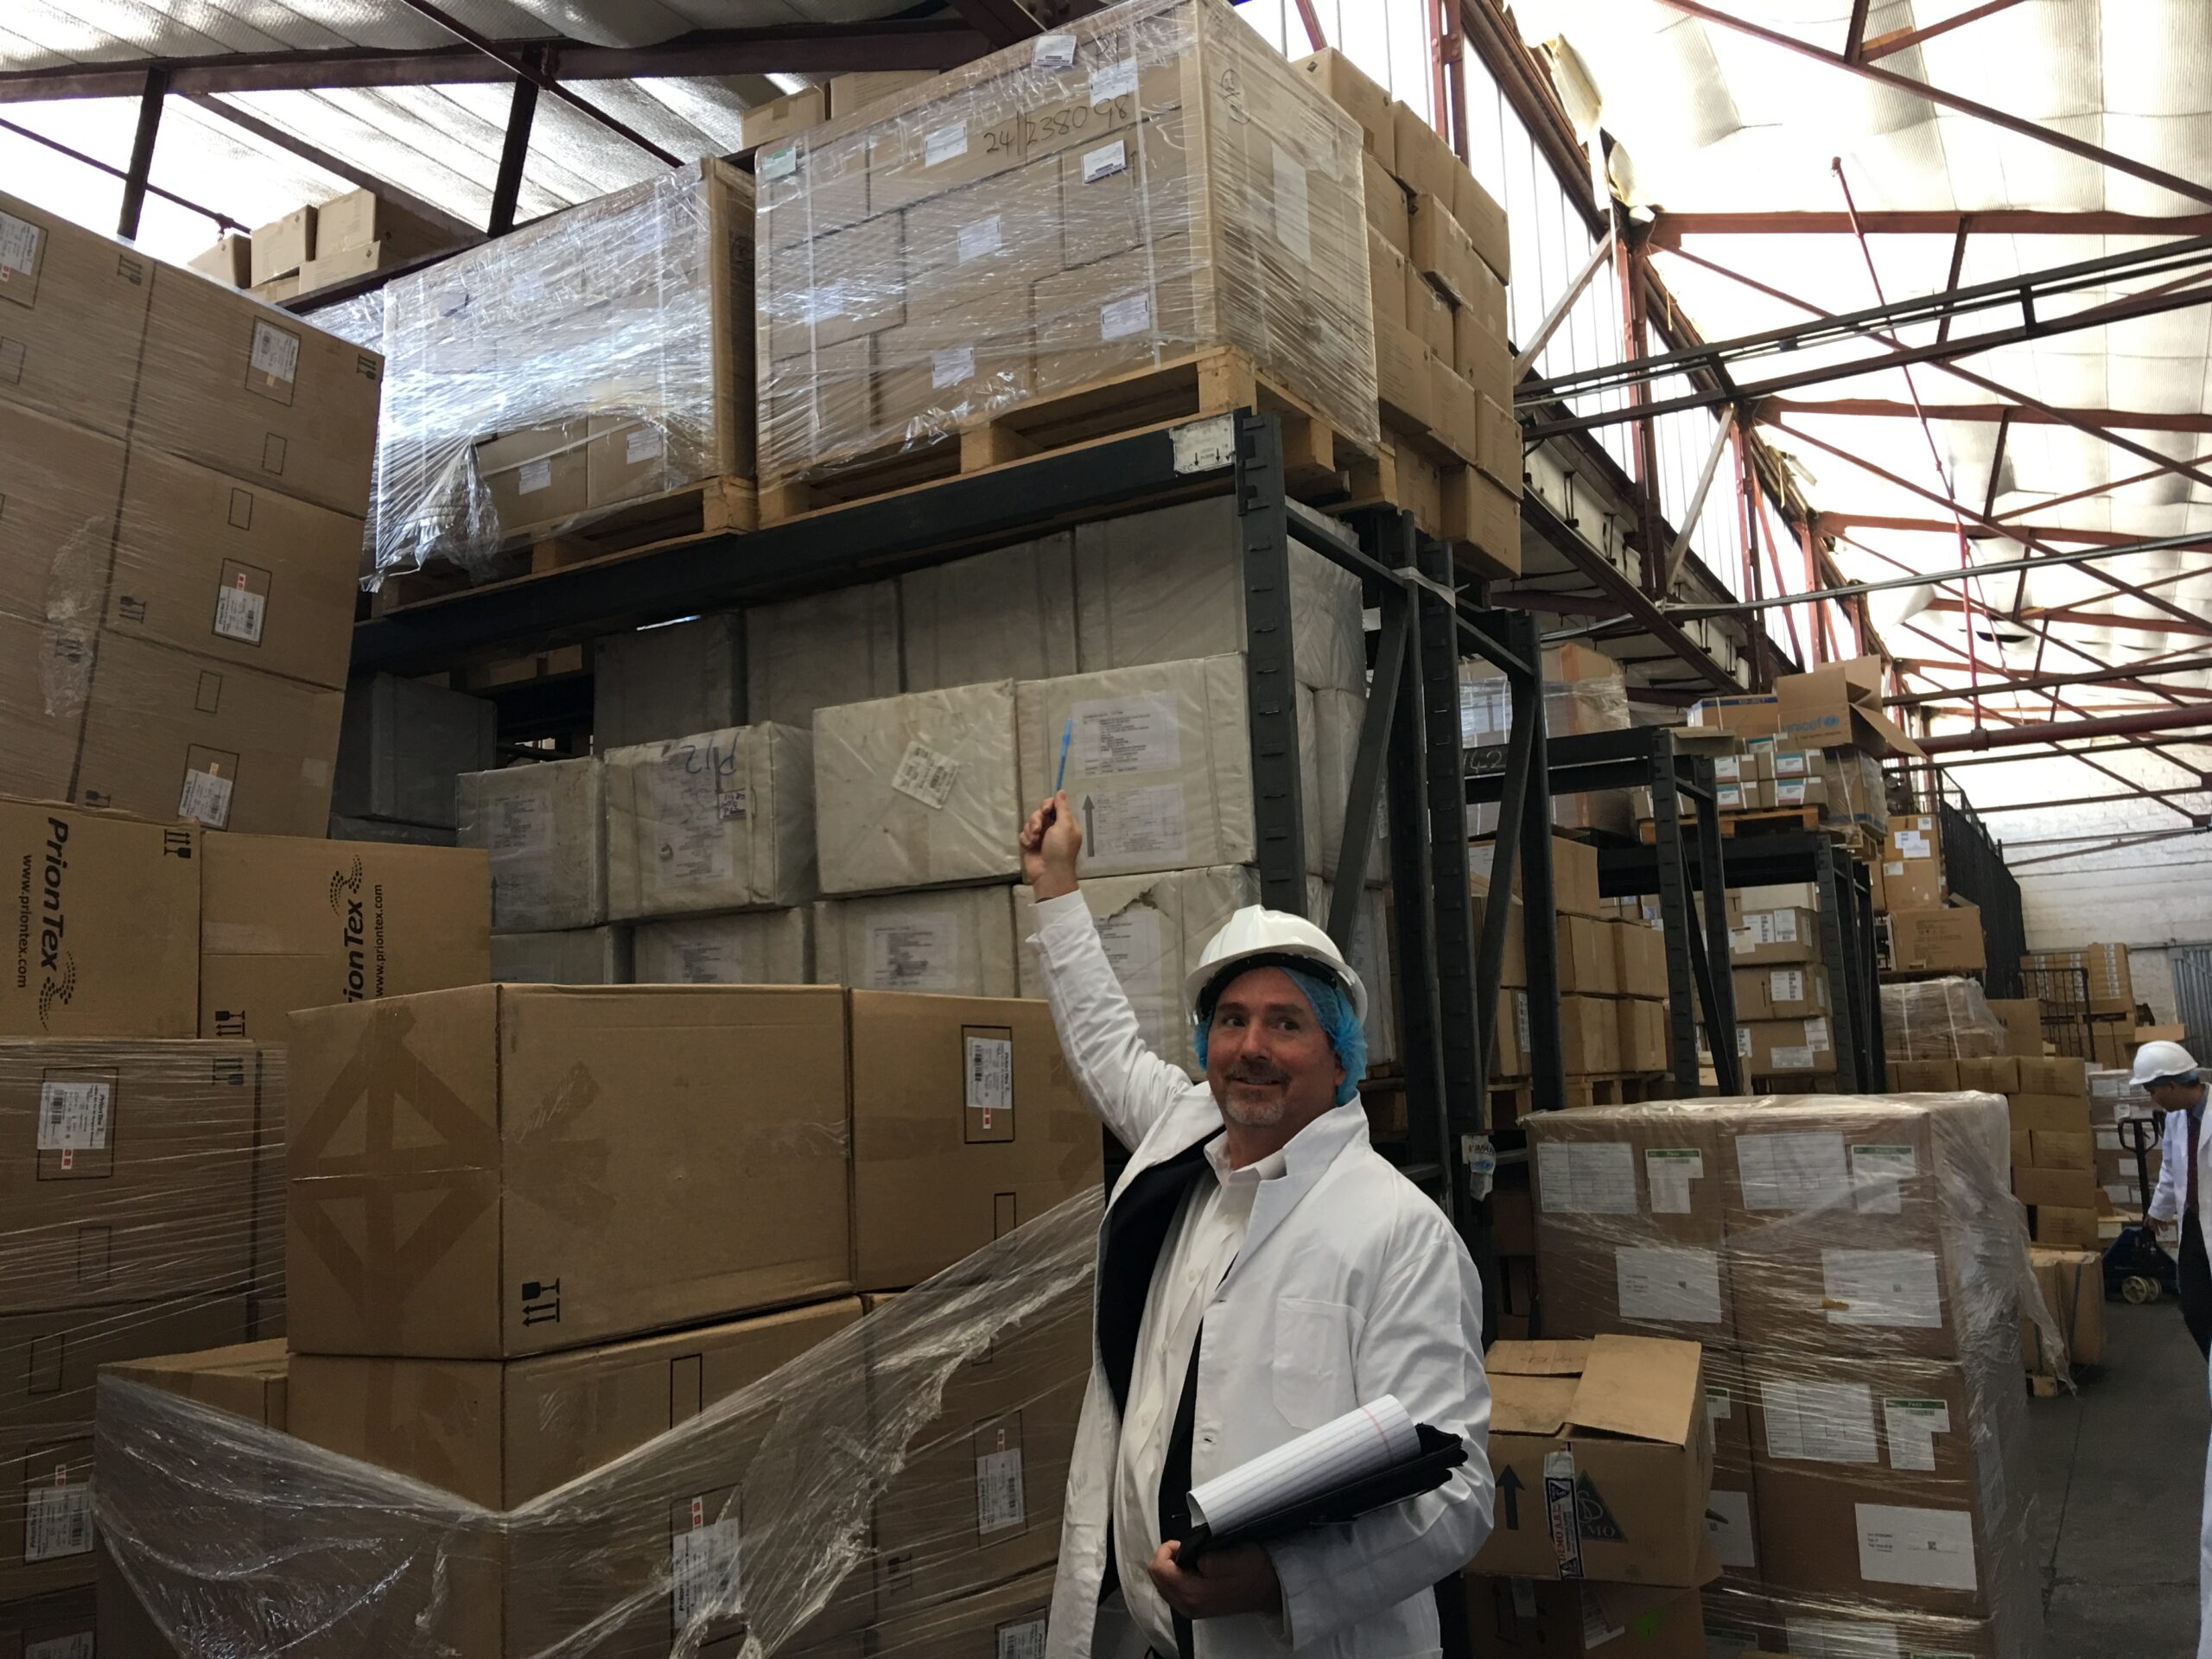 Shelsby visits the Central Medical Warehouse in Harare, Zimbabwe. Here, he's pointing to health commodities that his program supplied. Photo courtesy of Shelsby.